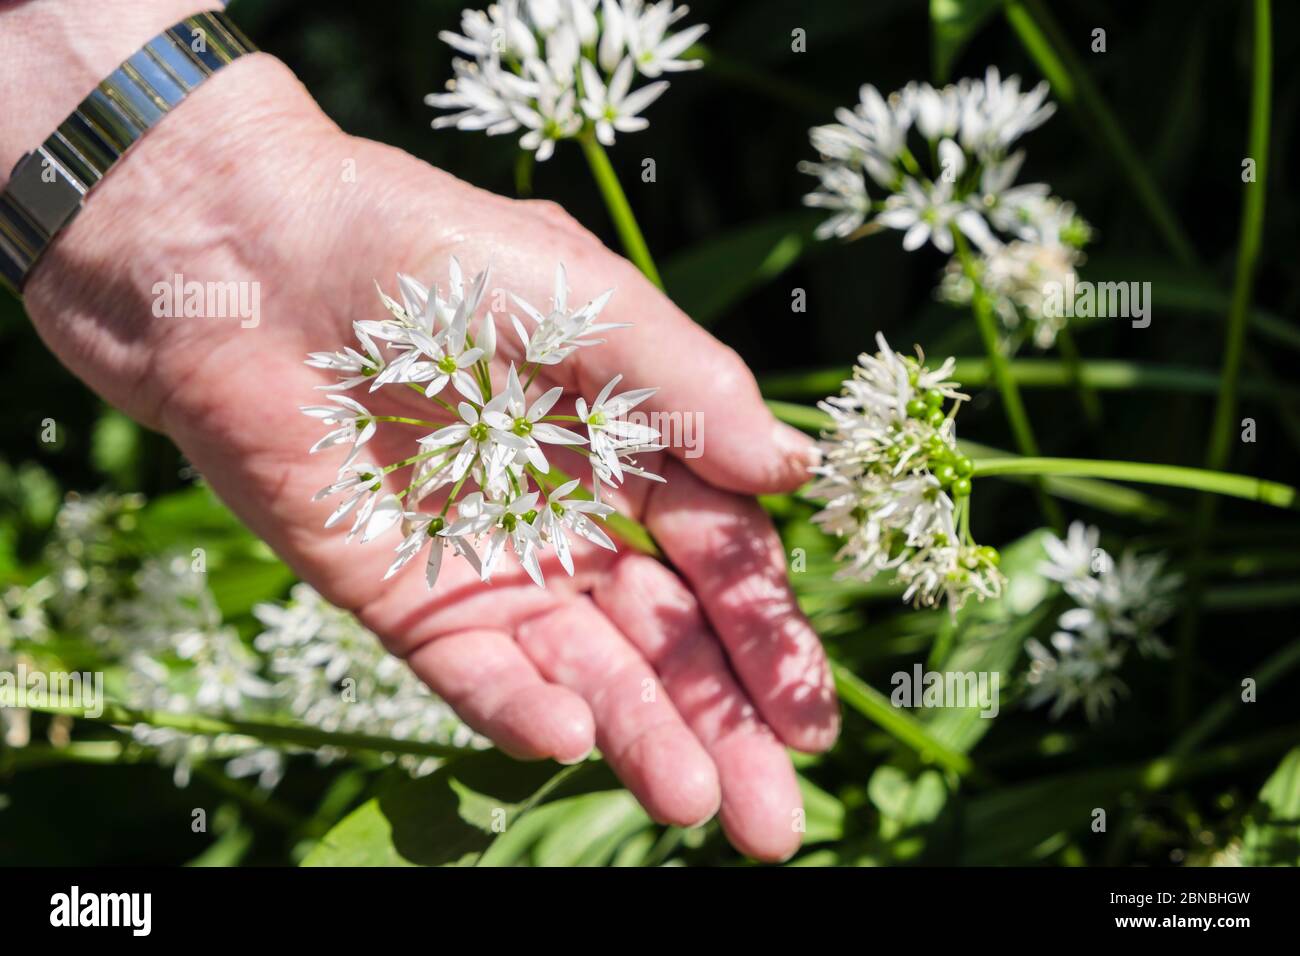 a senior ladys hand holding wild garlic or ramson flowers growing in a hedgerow isle of anglesey wales uk britain 2BNBHGW